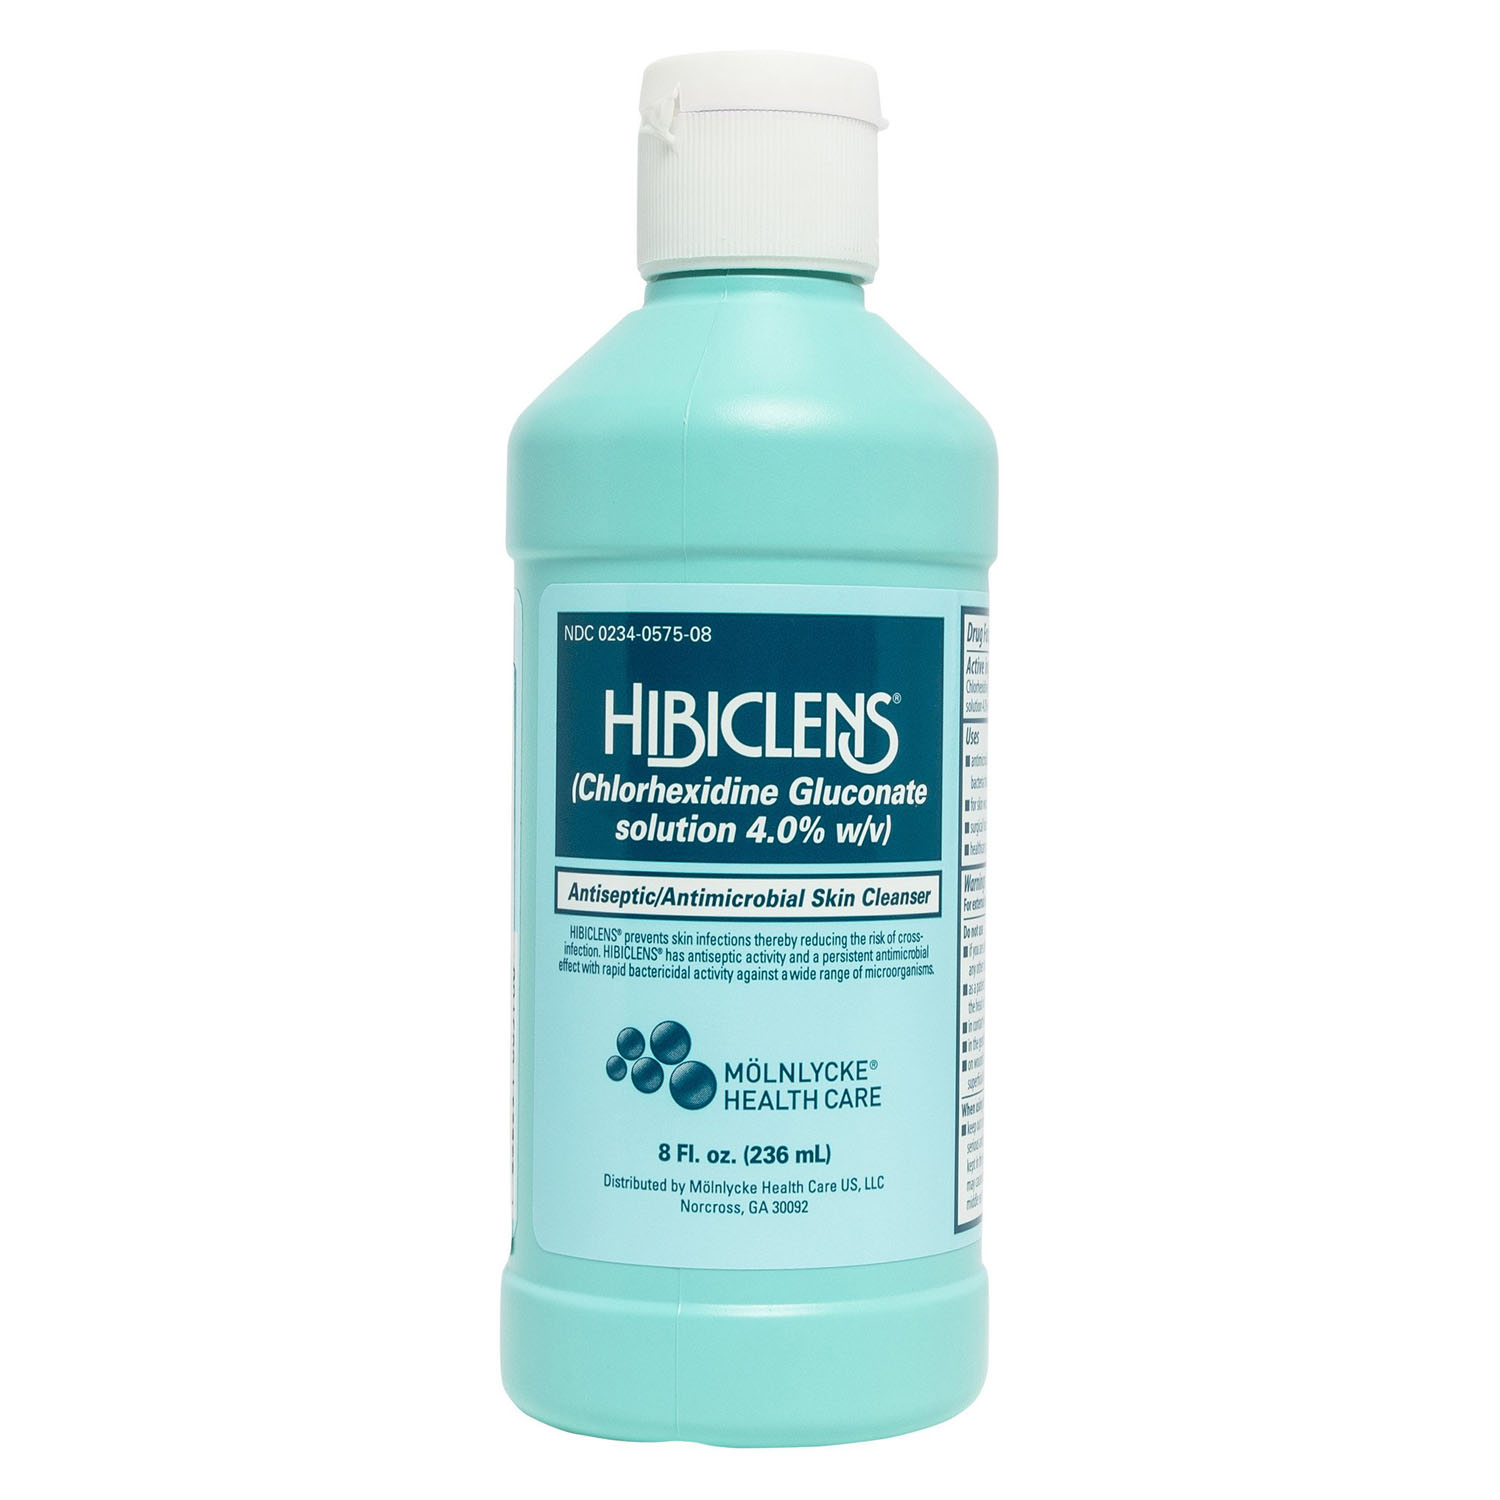 MOLNLYCKE HIBICLENS ANTISEPTIC ANTIMICROBIAL SKIN CLEANSER : 57508 CS $178.49 Stocked